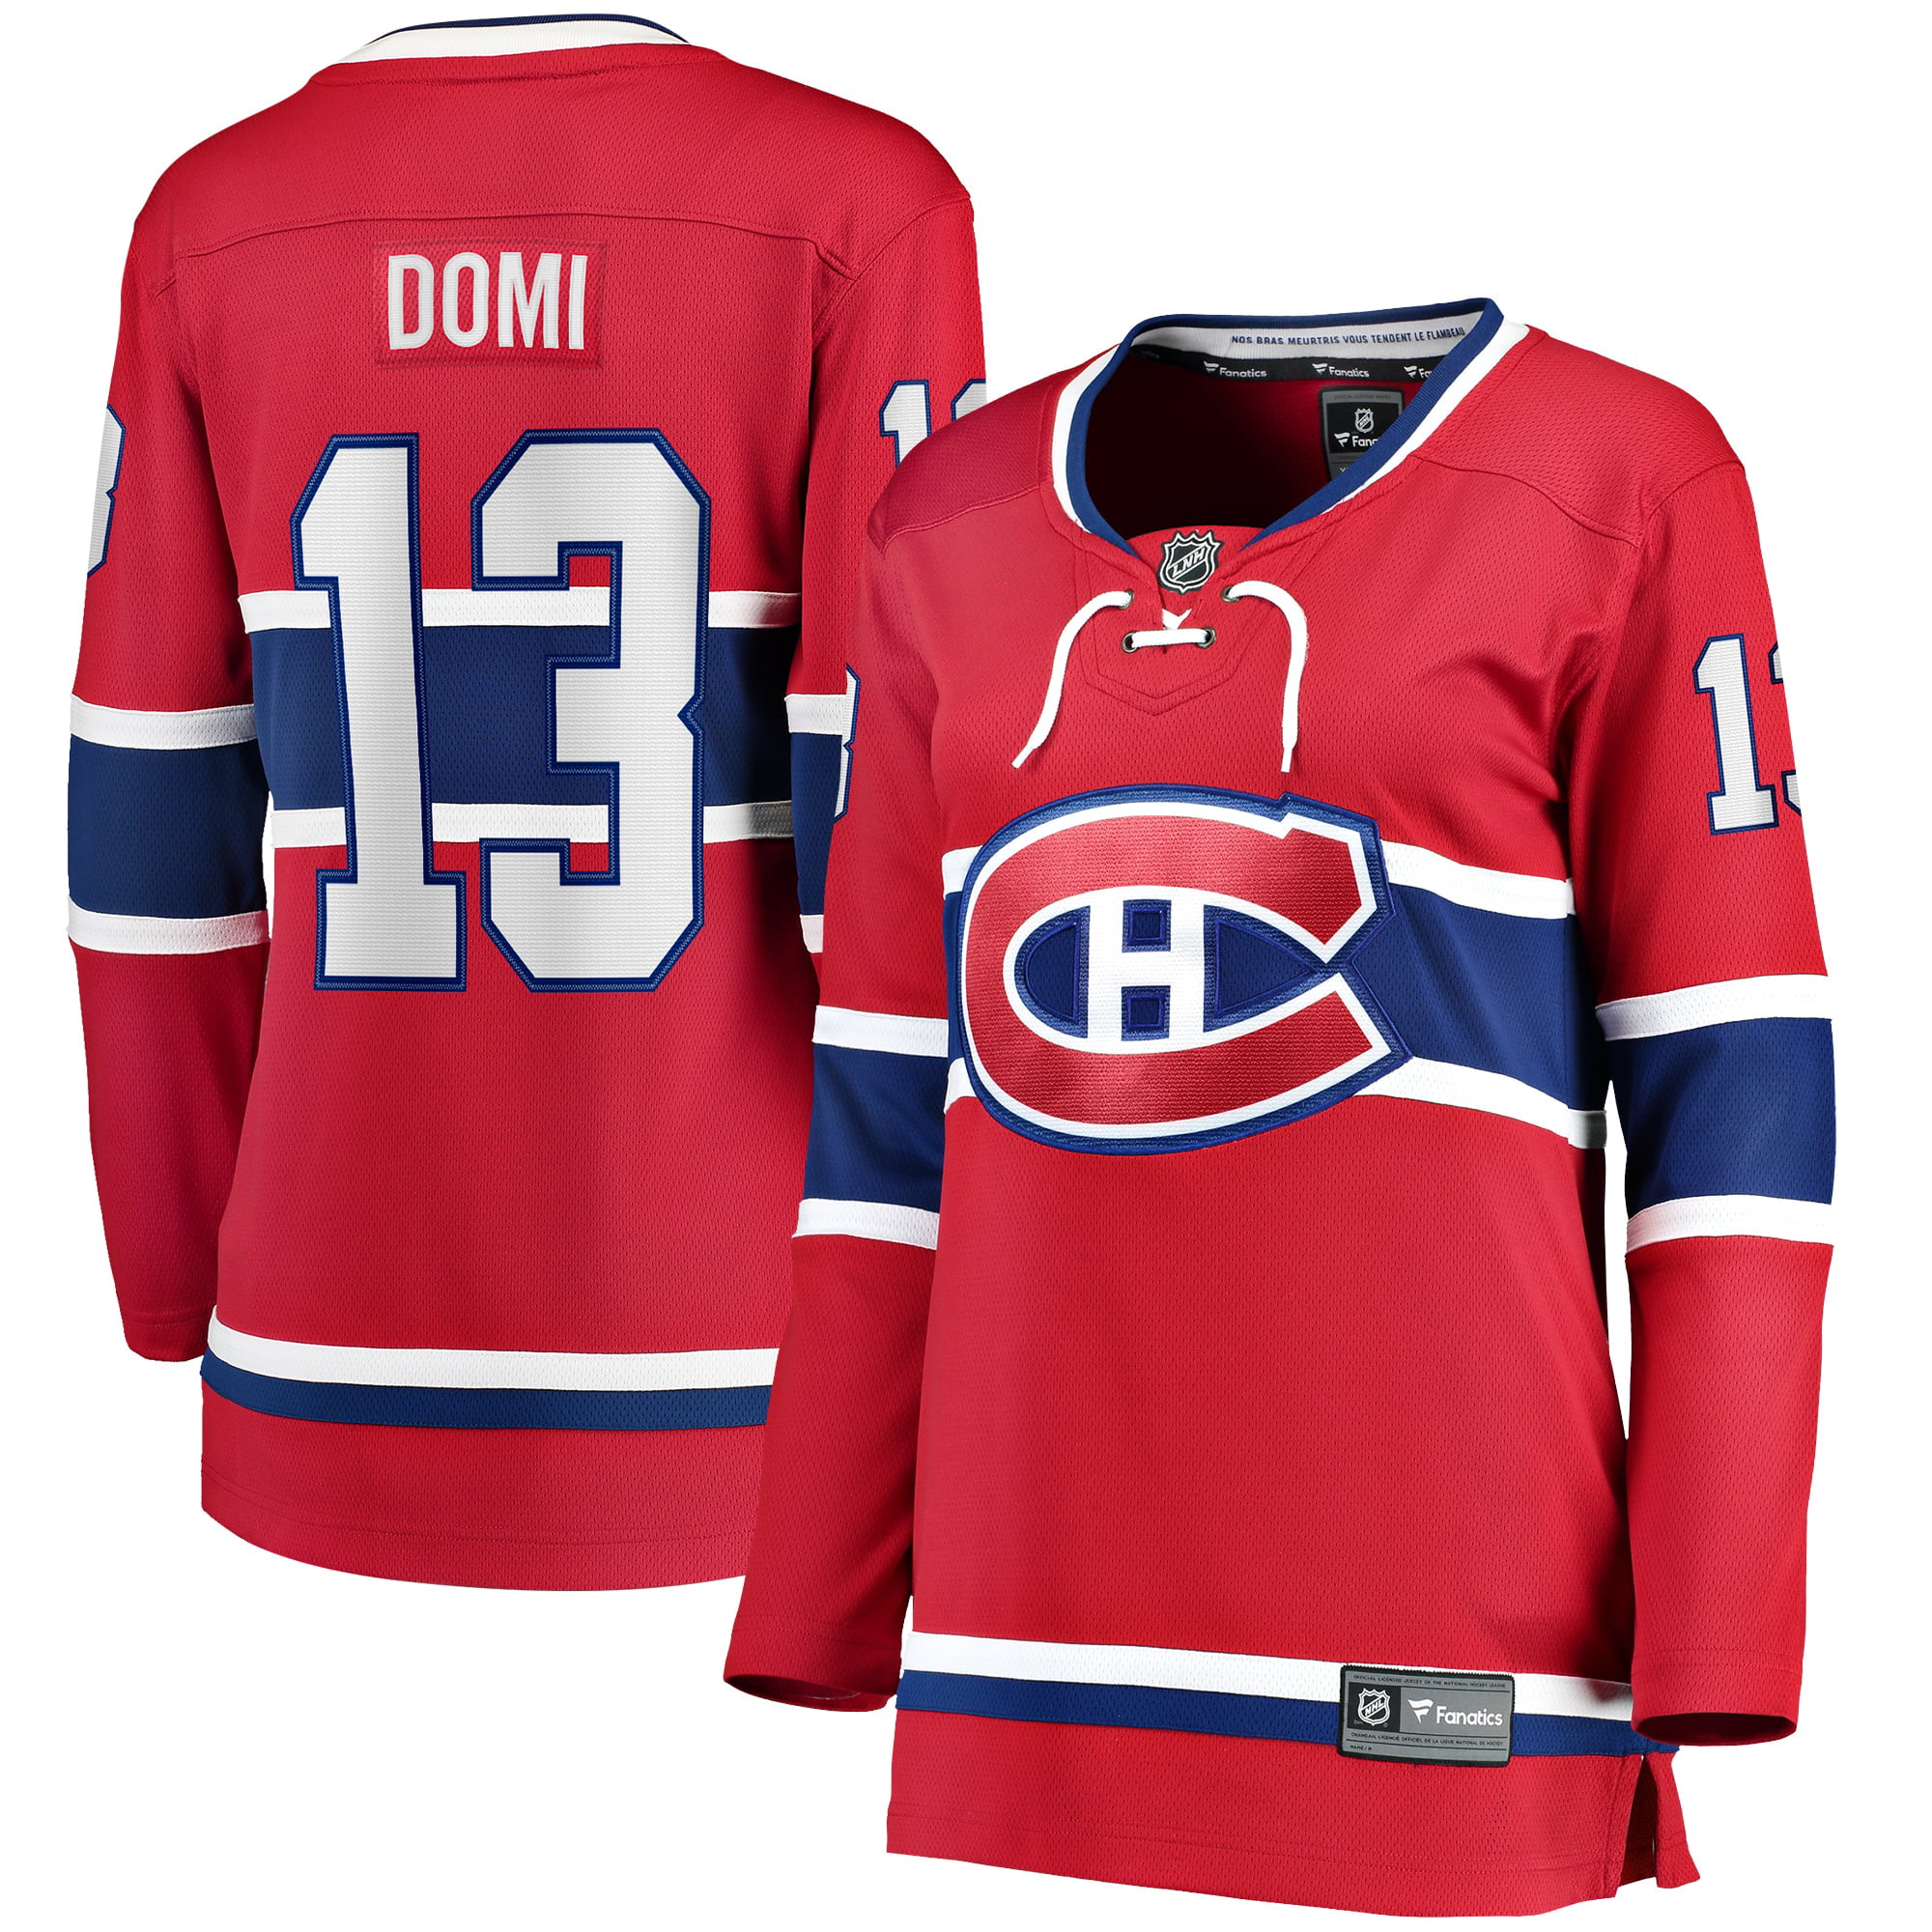 max domi signed jersey